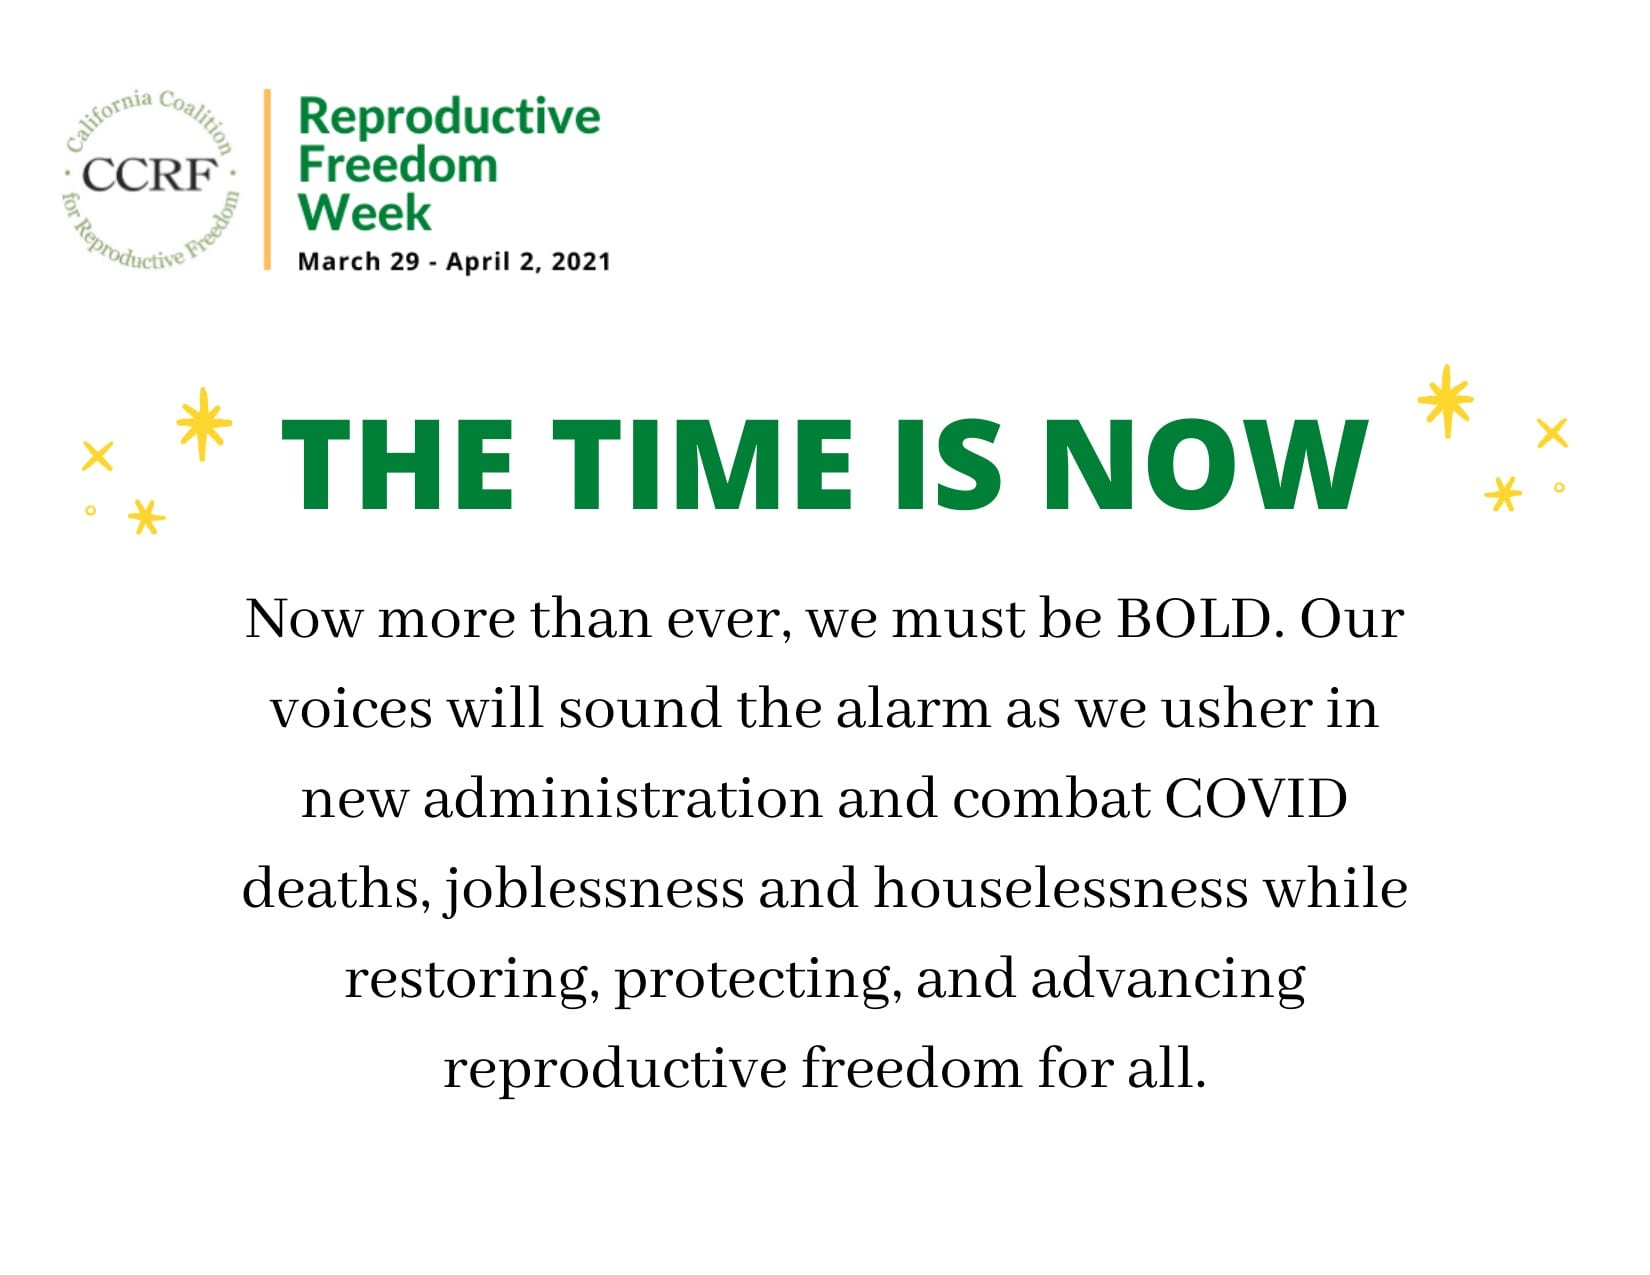 CCRF Reproductive Freedom Week. March 29 - April 2, 2001. The time is now. Now more than ever, we must be bold. Our voices will sound the alarm as we usher in new administration and combat COVID deaths, joblessness and houselessness while restoring, protecting, and advancing reproductive freedom for all.